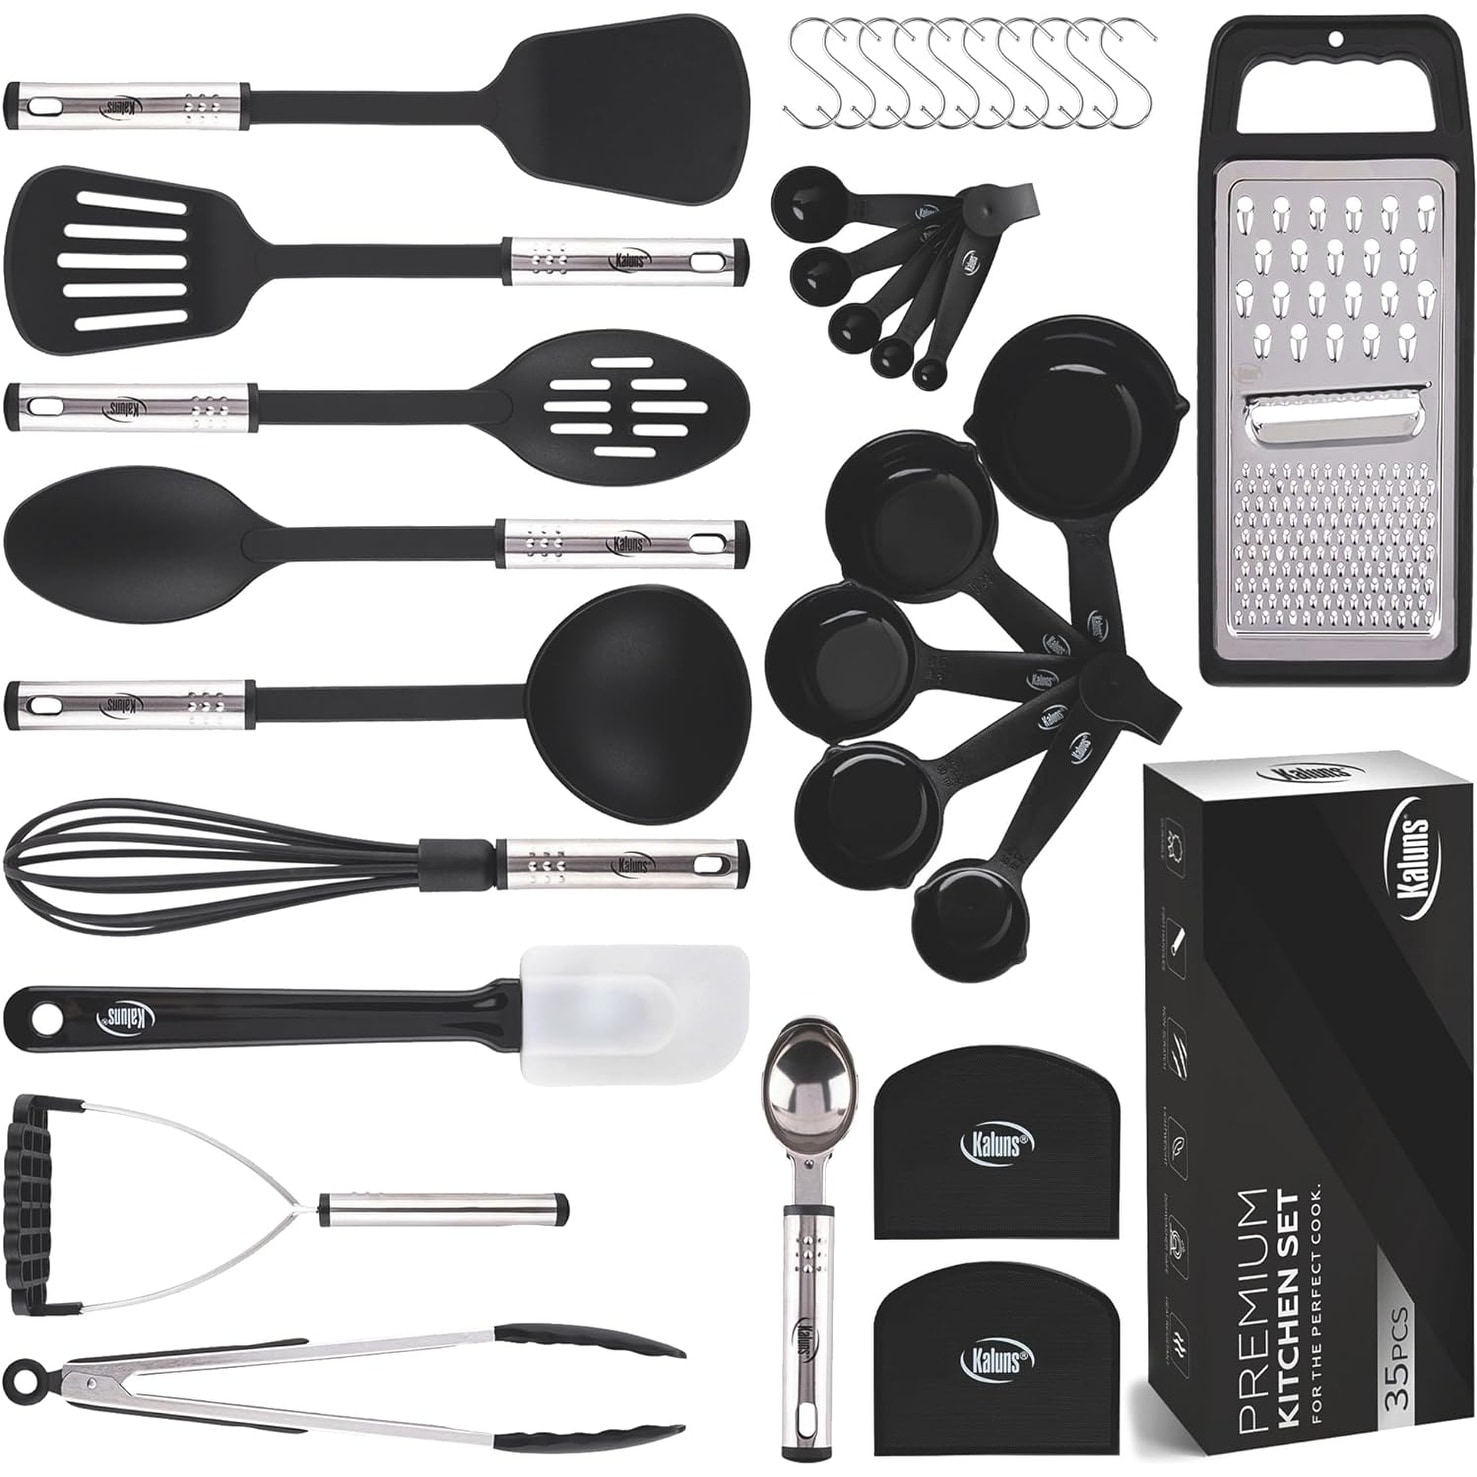 https://ak1.ostkcdn.com/images/products/is/images/direct/fc081949d9111b2fd86921a9c9faf642865ab54b/Kitchen-Utensil-Set%2C-Nylon-and-Stainless-Steel-Cooking-Utensils.jpg